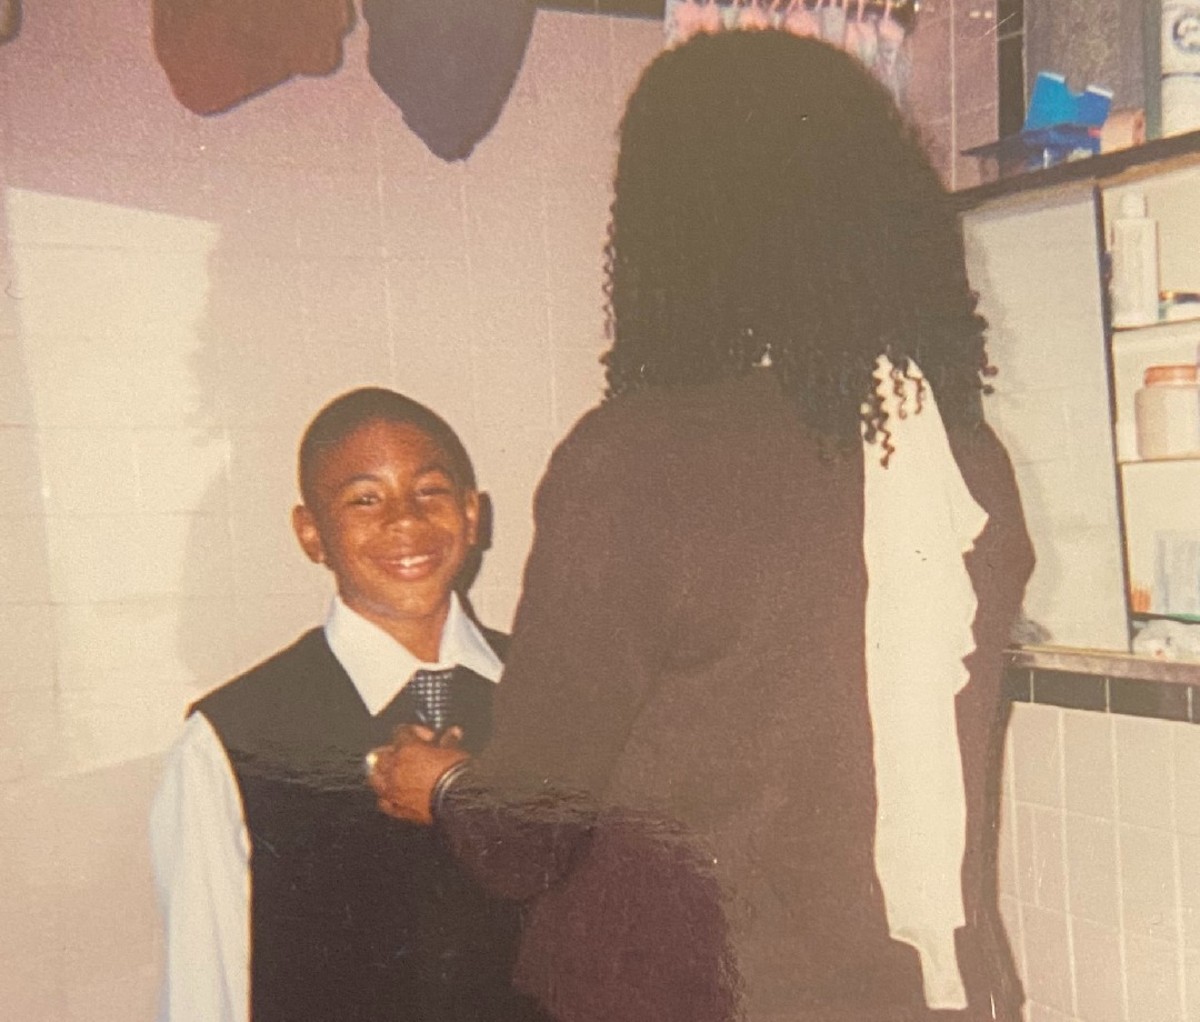 Blaise Ffrench as an adolescent in a suit, with his mom fixing his tie.